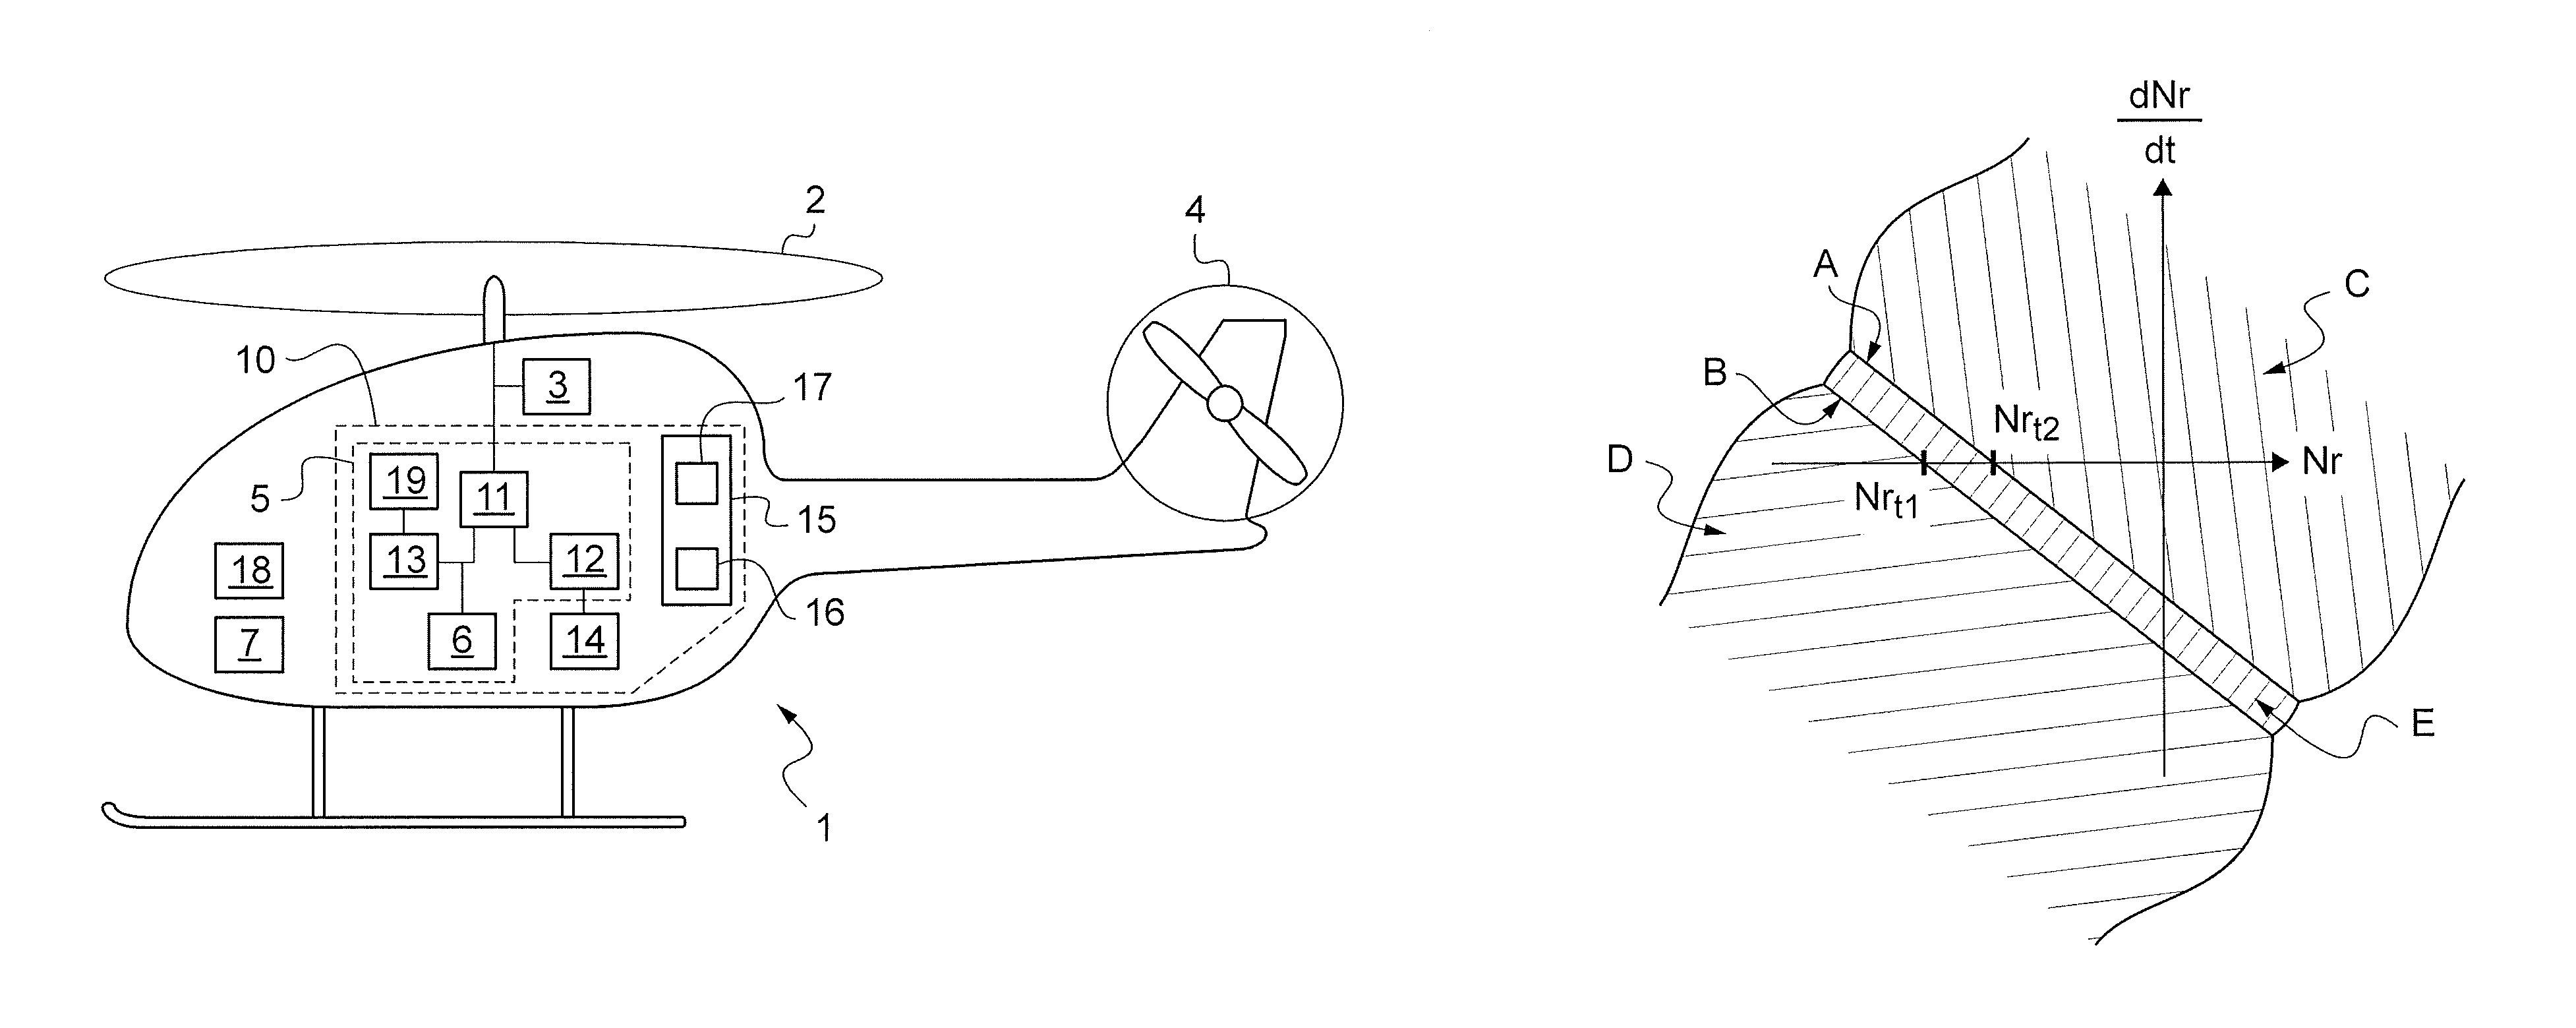 Method of assisting a pilot of a single-engined rotary wing aircraft during a stage of flight in autorotation